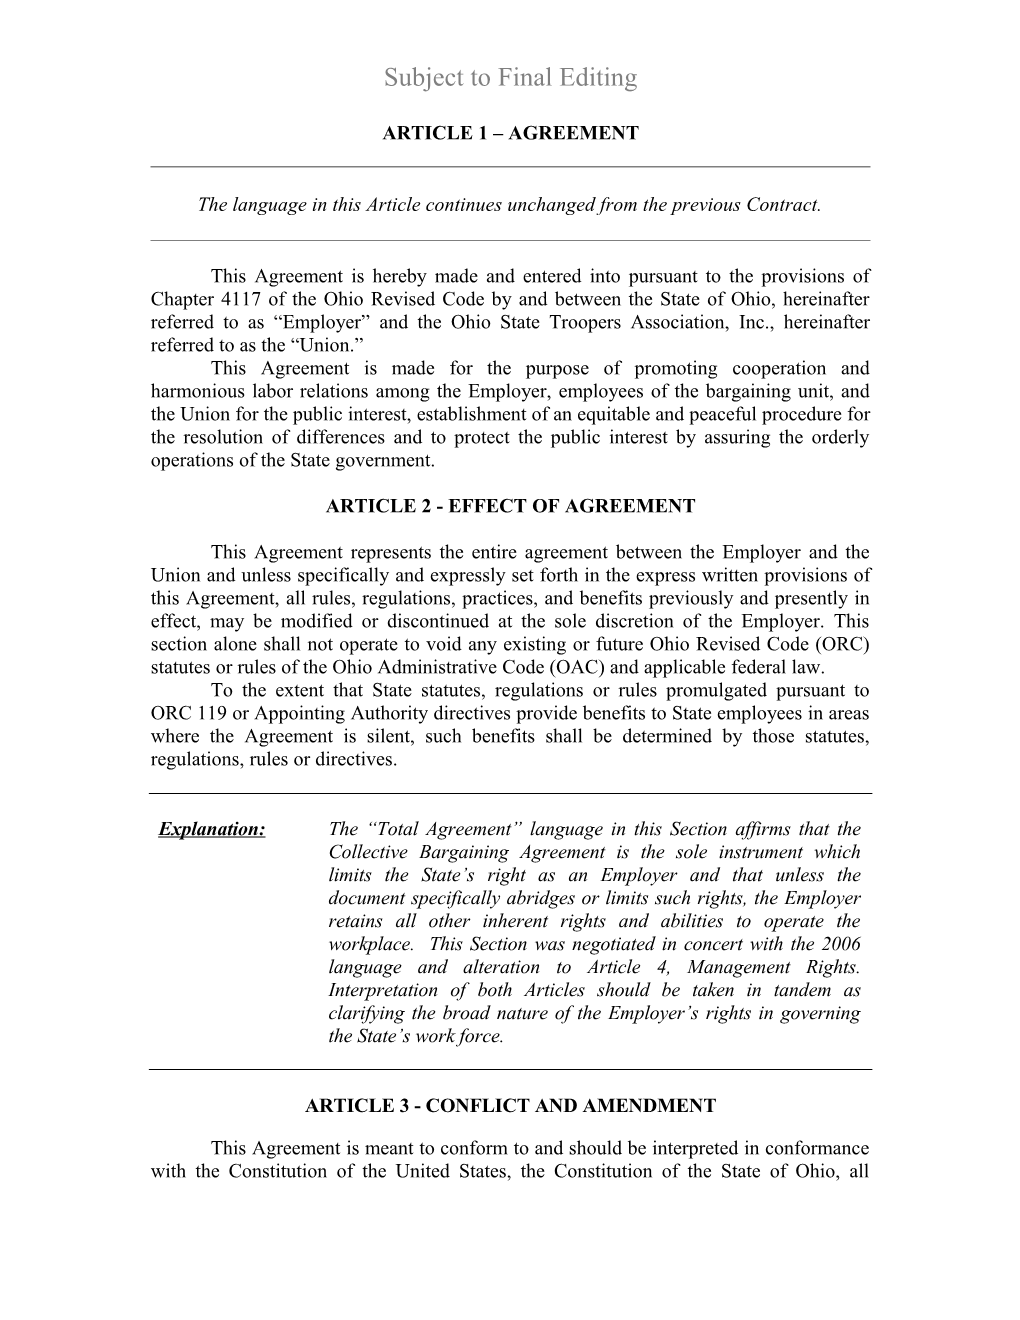 Article 1 Agreement